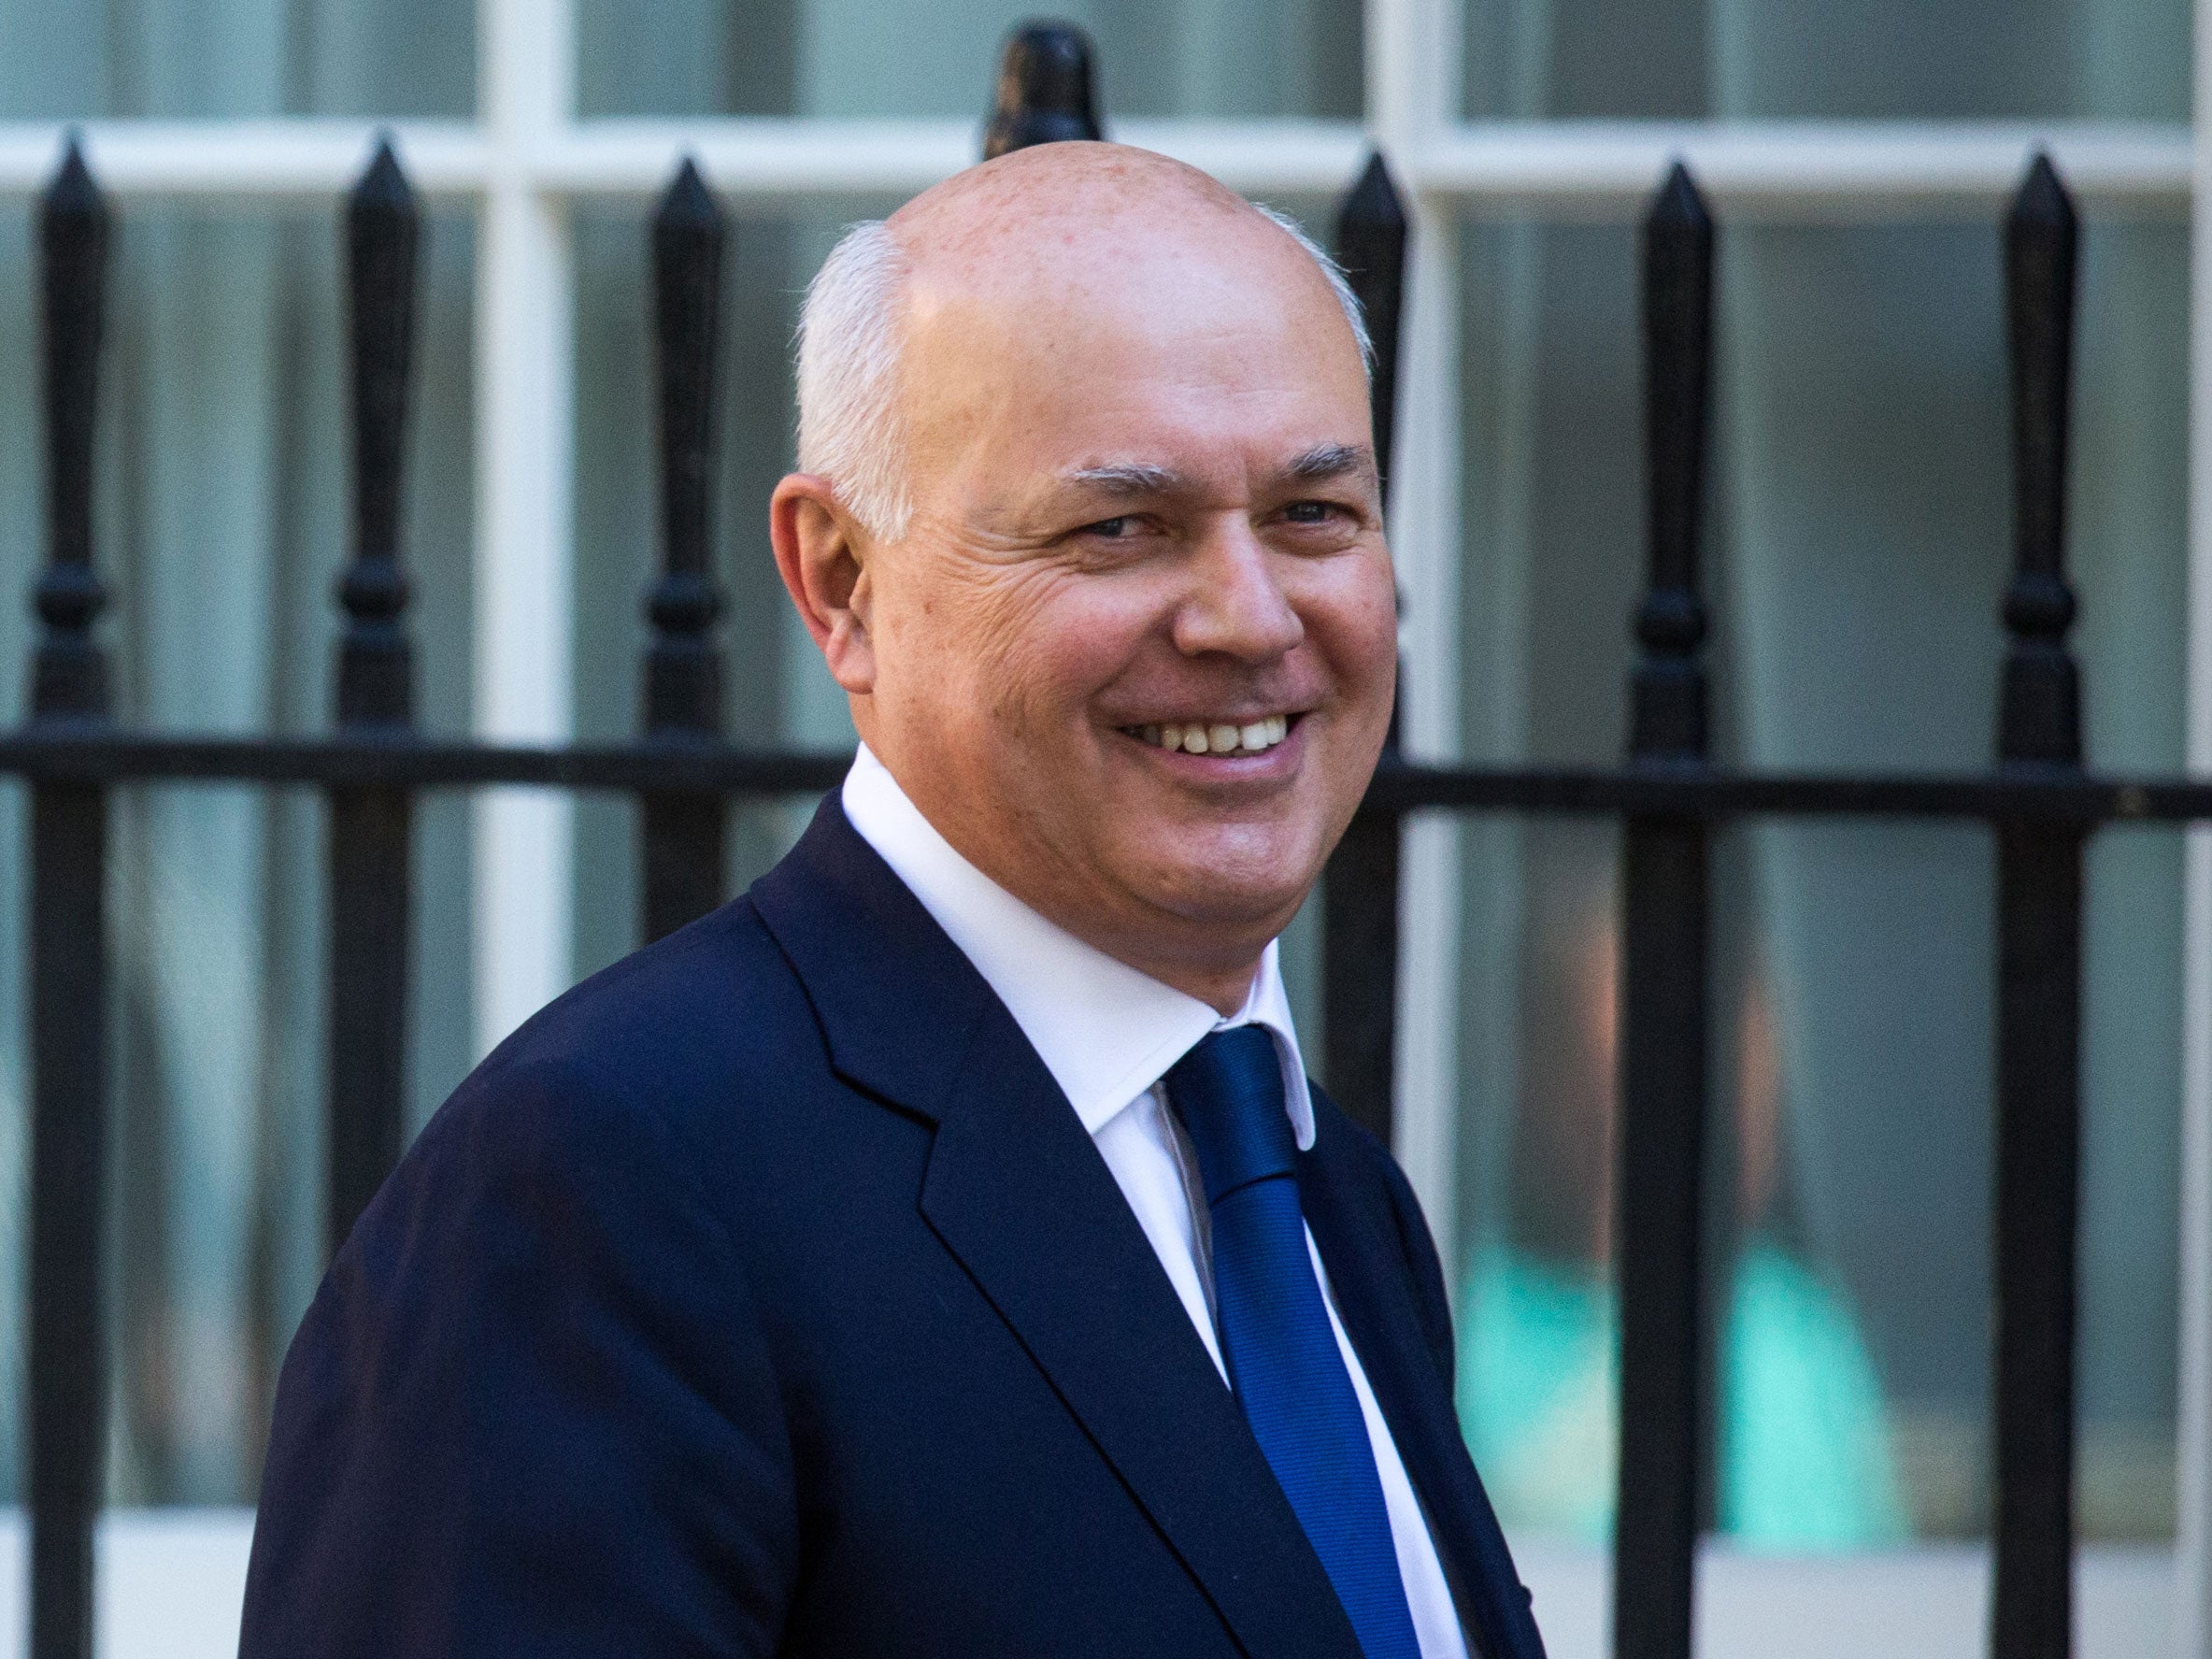 Universal Credit has been the flagship welfare programme under Iain Duncan Smith